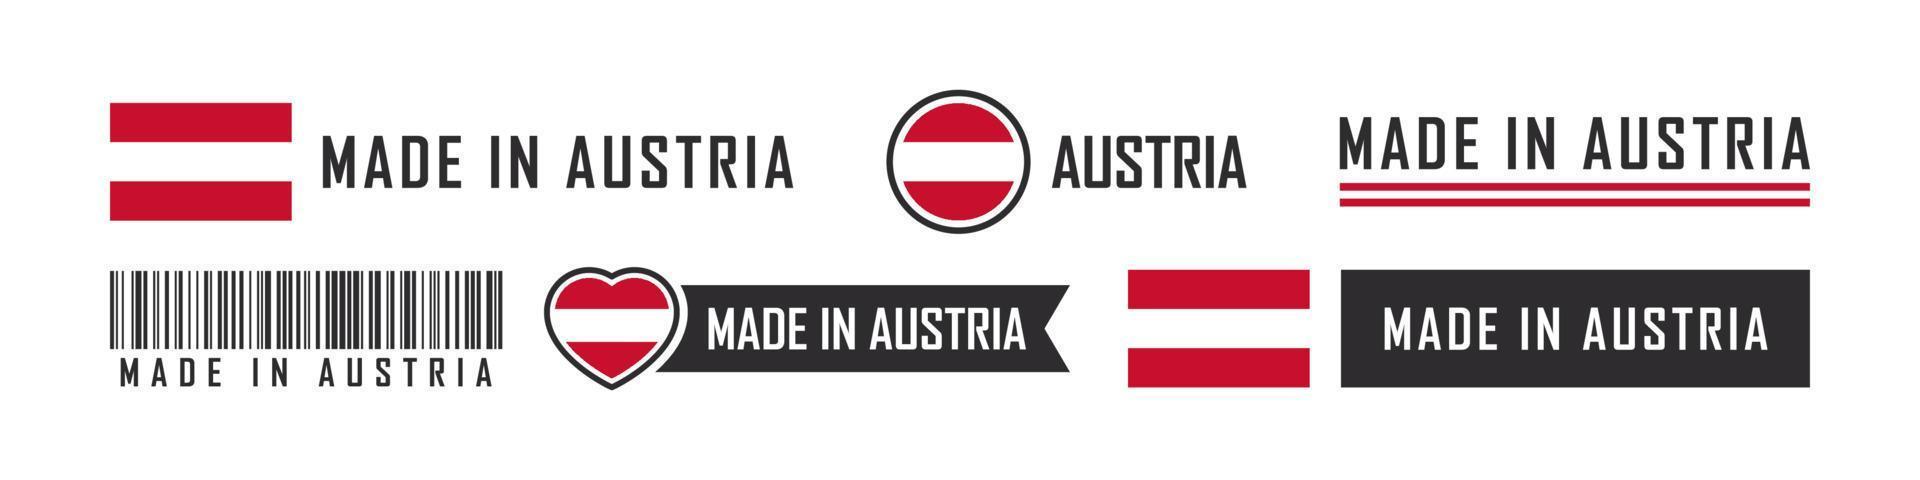 Made in Austria logo or labels. Austria product emblems. Vector illustration